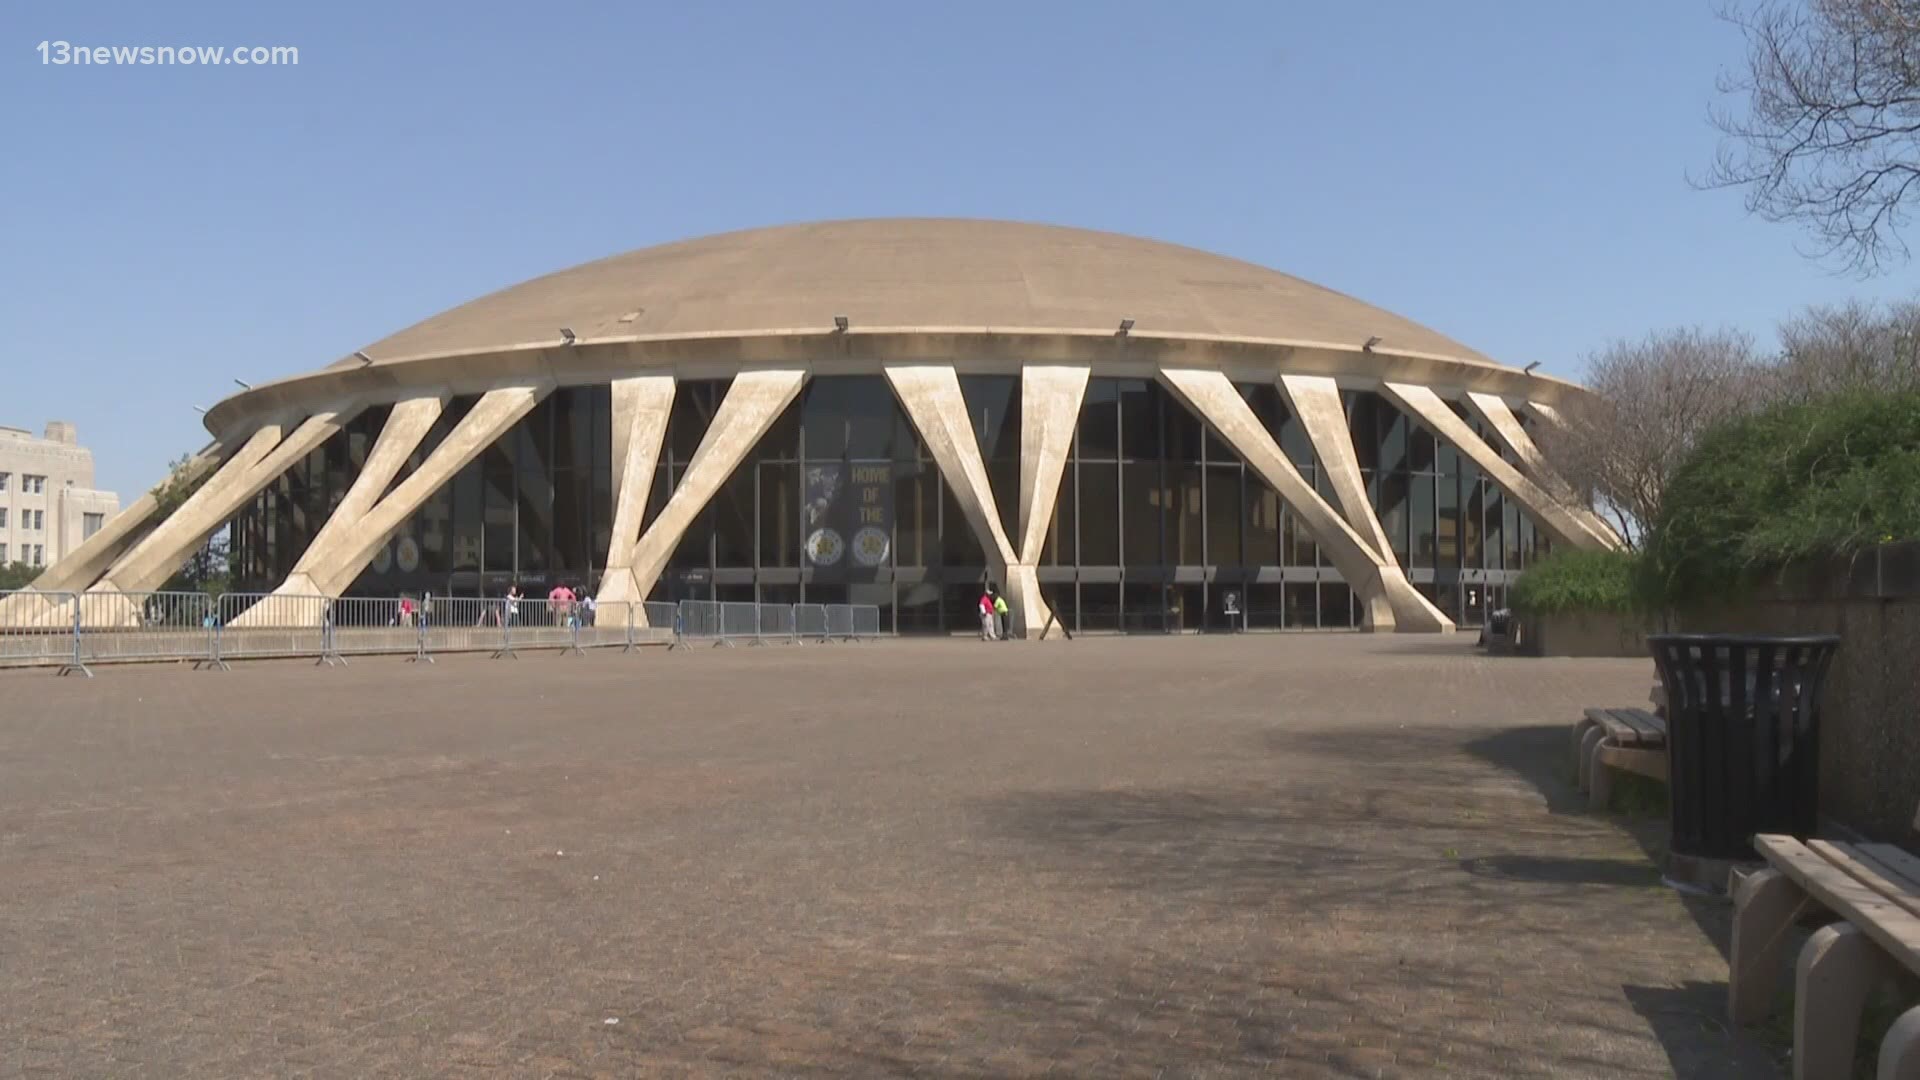 Tickets are on sale for events at big venues like Norfolk Scope and the Hampton Coliseum.